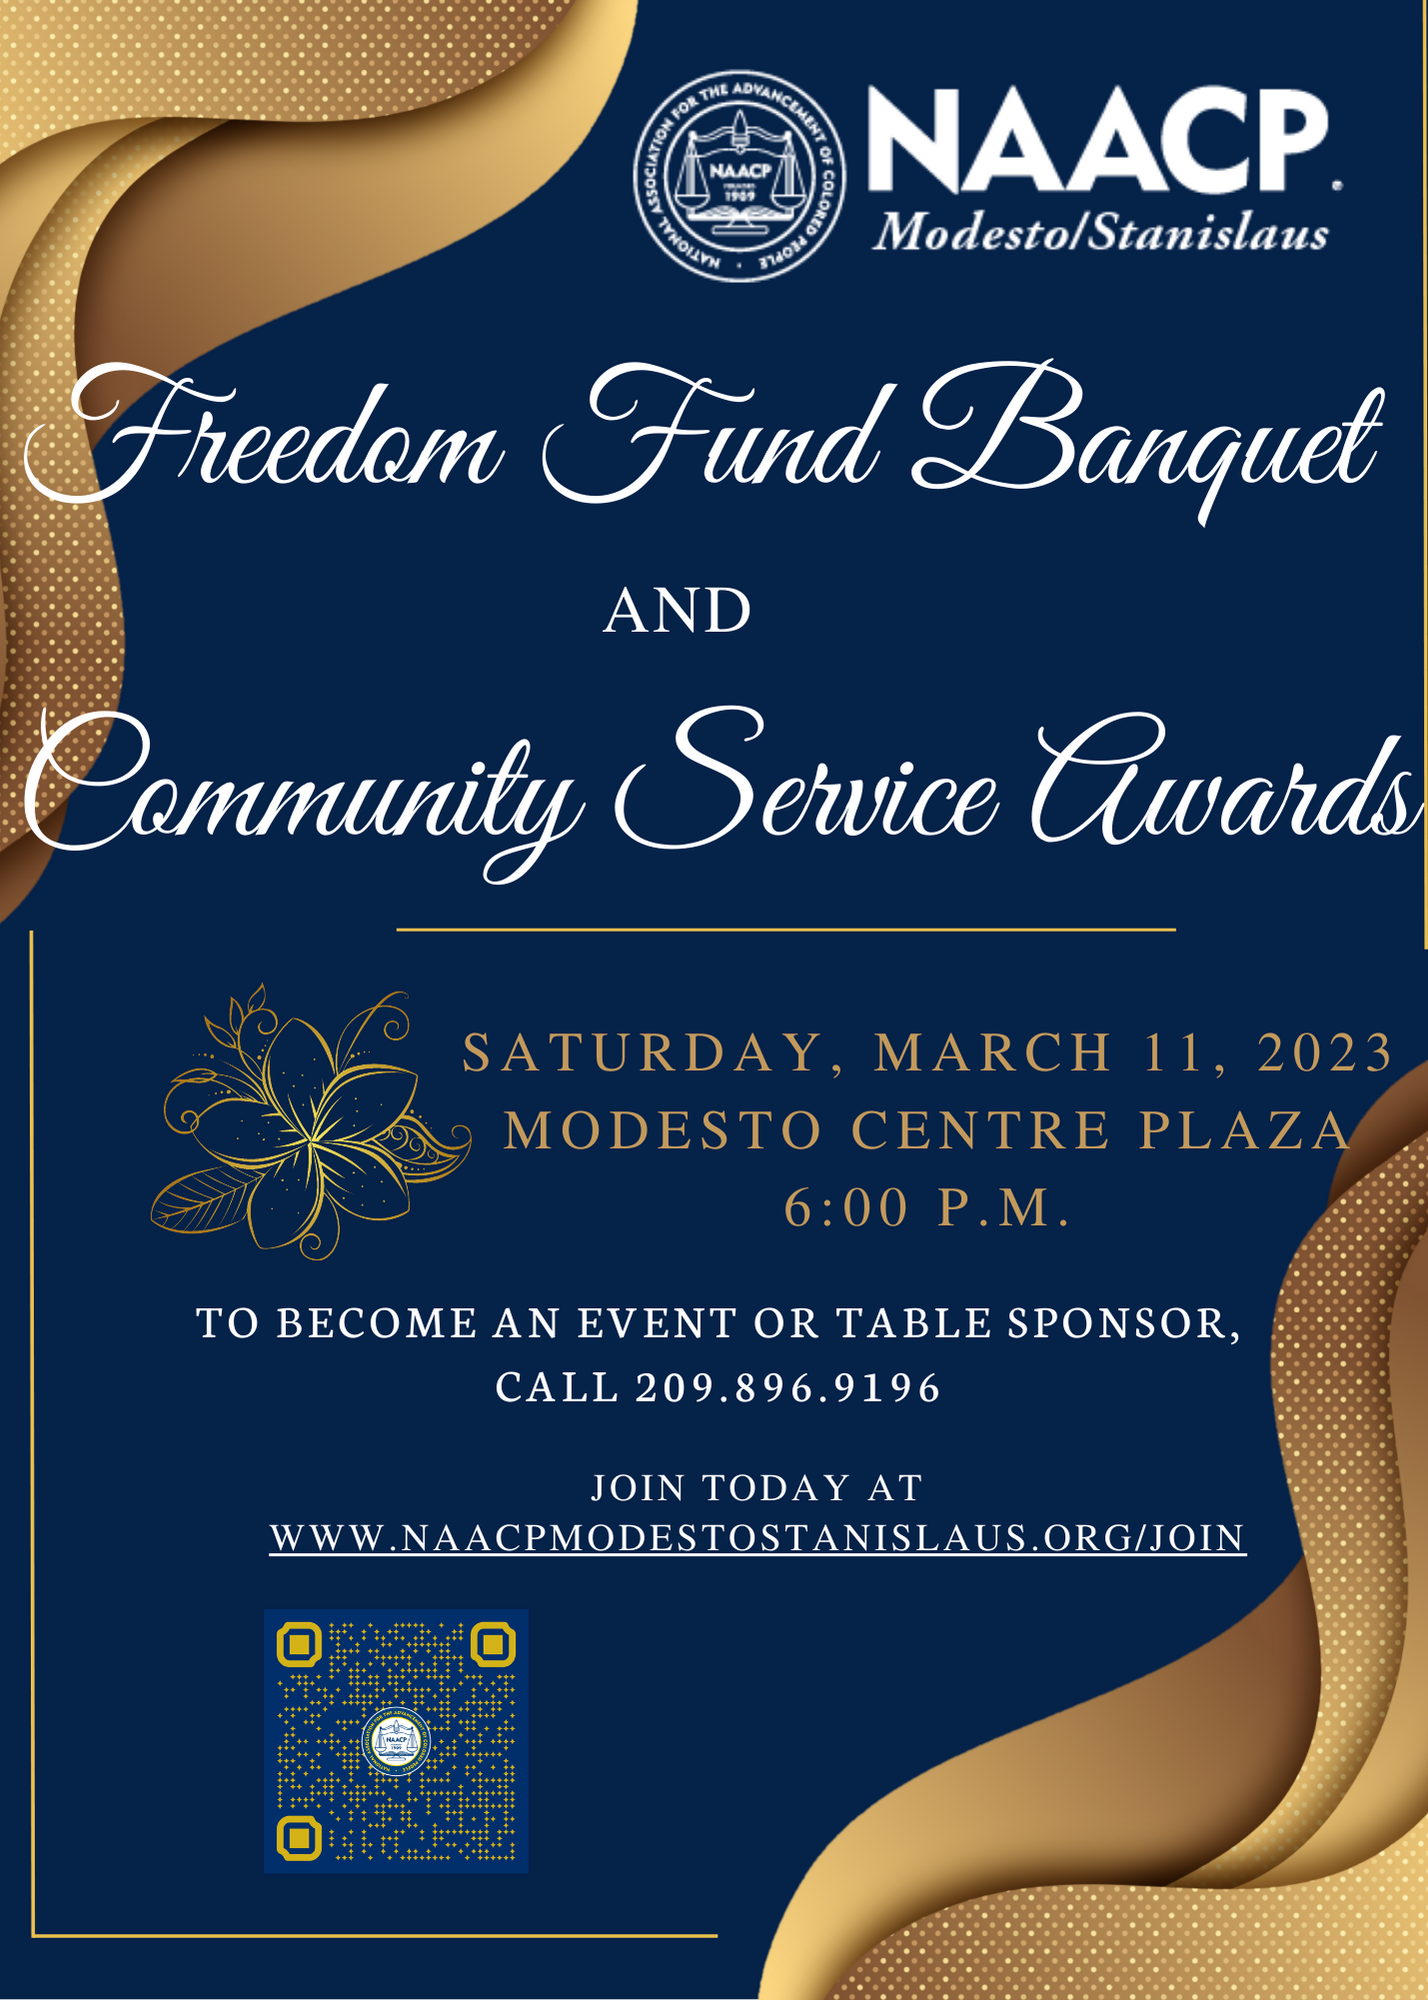 NAACP Freedom Fund Banquet & Community Service Awards Visit Modesto